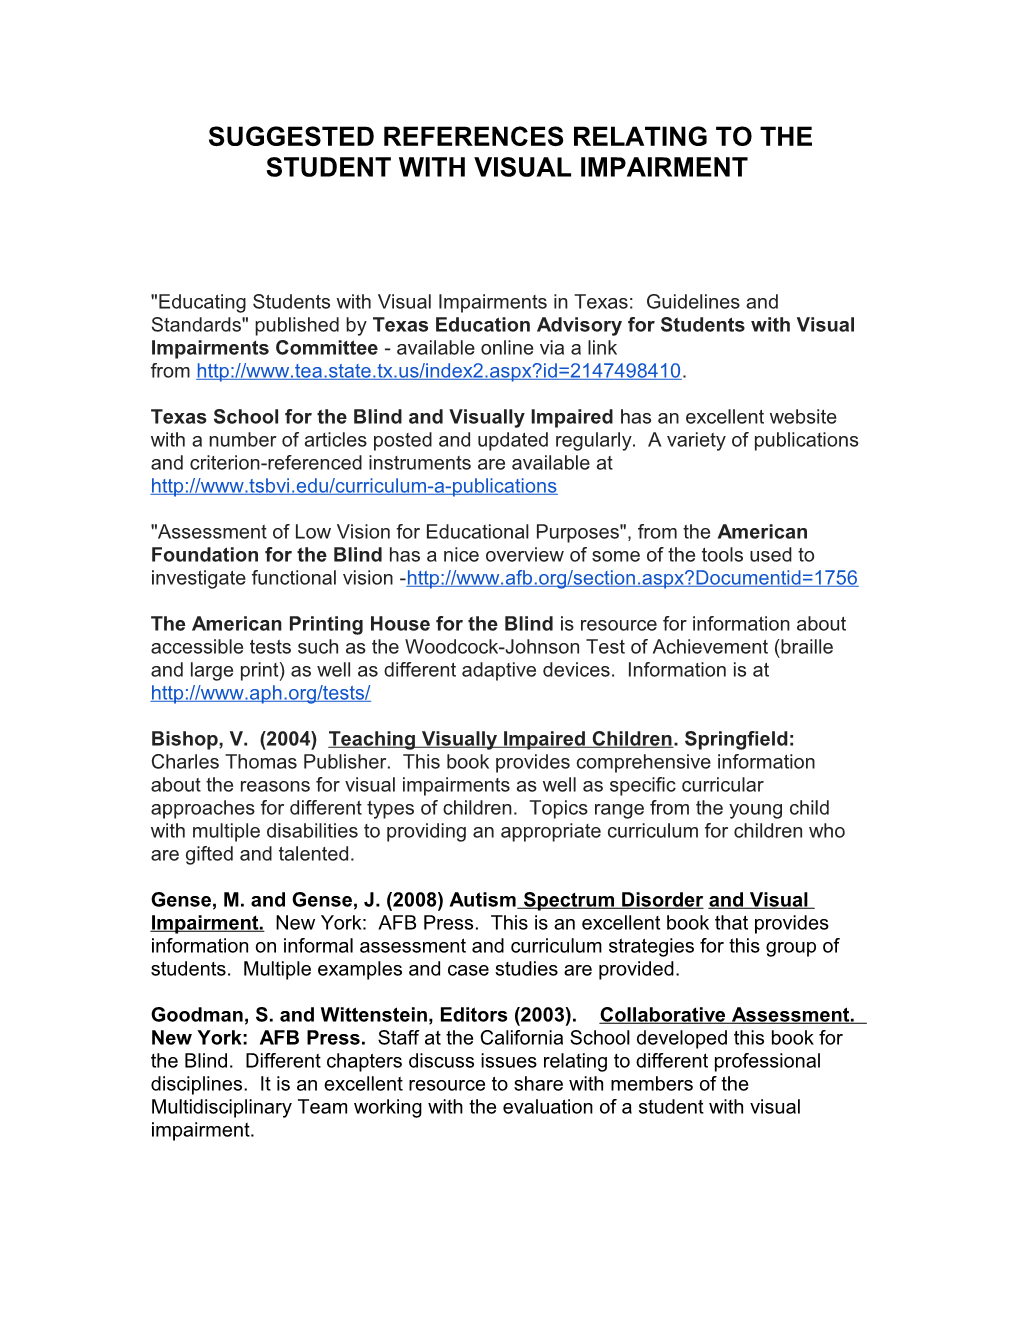 Suggested References Relating to the Student with Visual Impairment